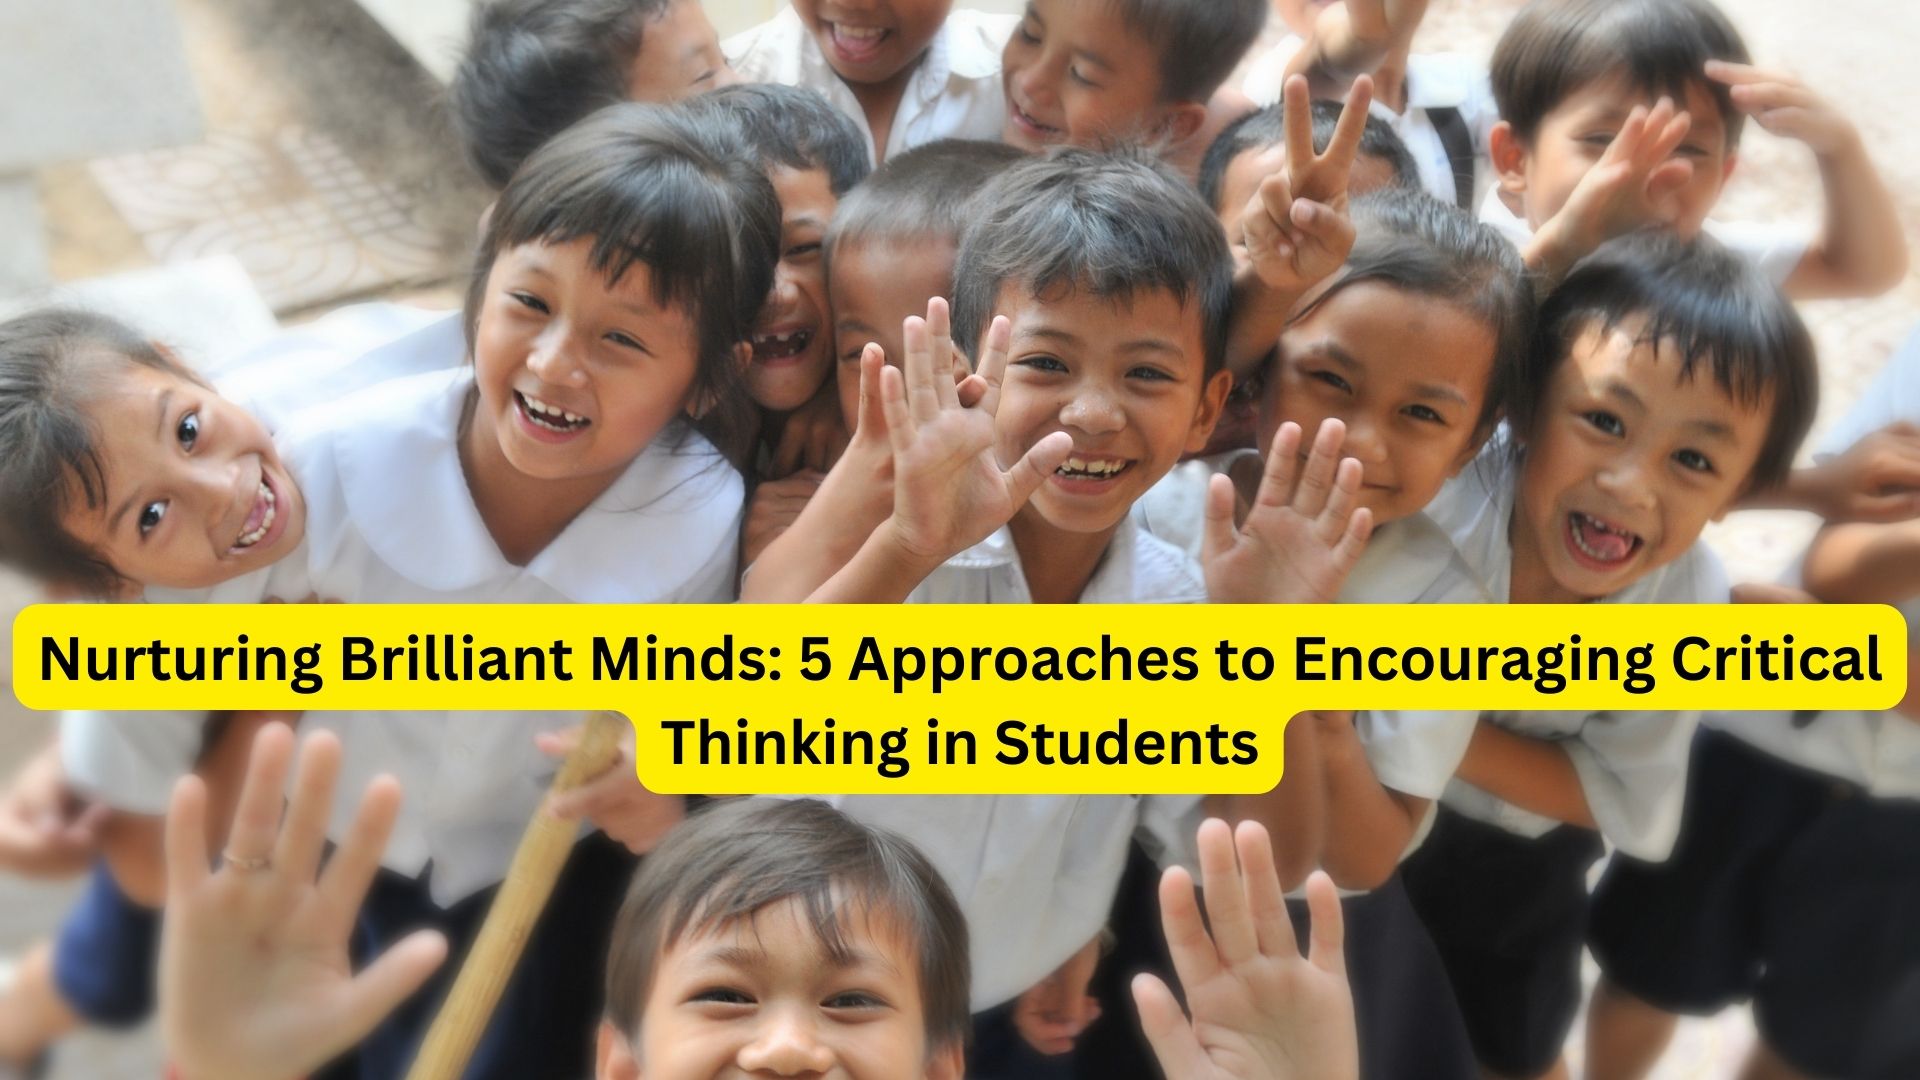 Nurturing Brilliant Minds: 5 Approaches to Encouraging Critical Thinking in Students